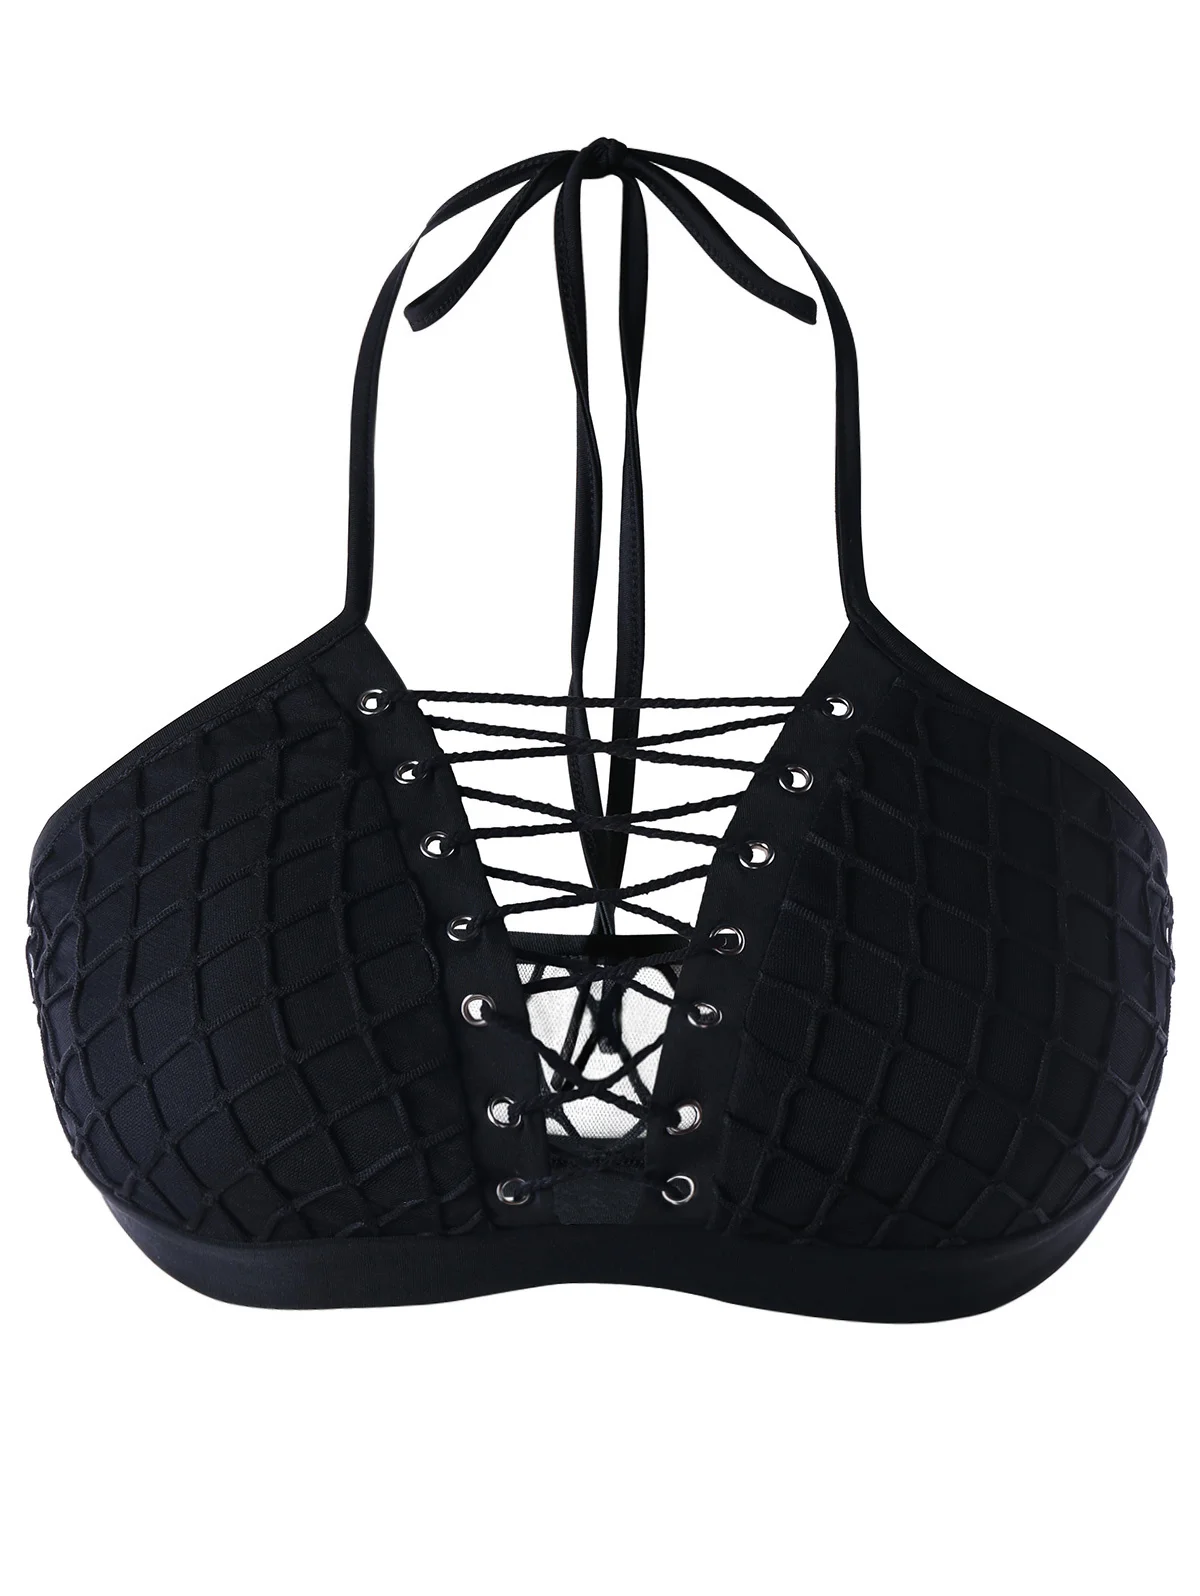 Buy Gamiss Women Sexy Lace Up Bra Plus Size 5xl Criss 